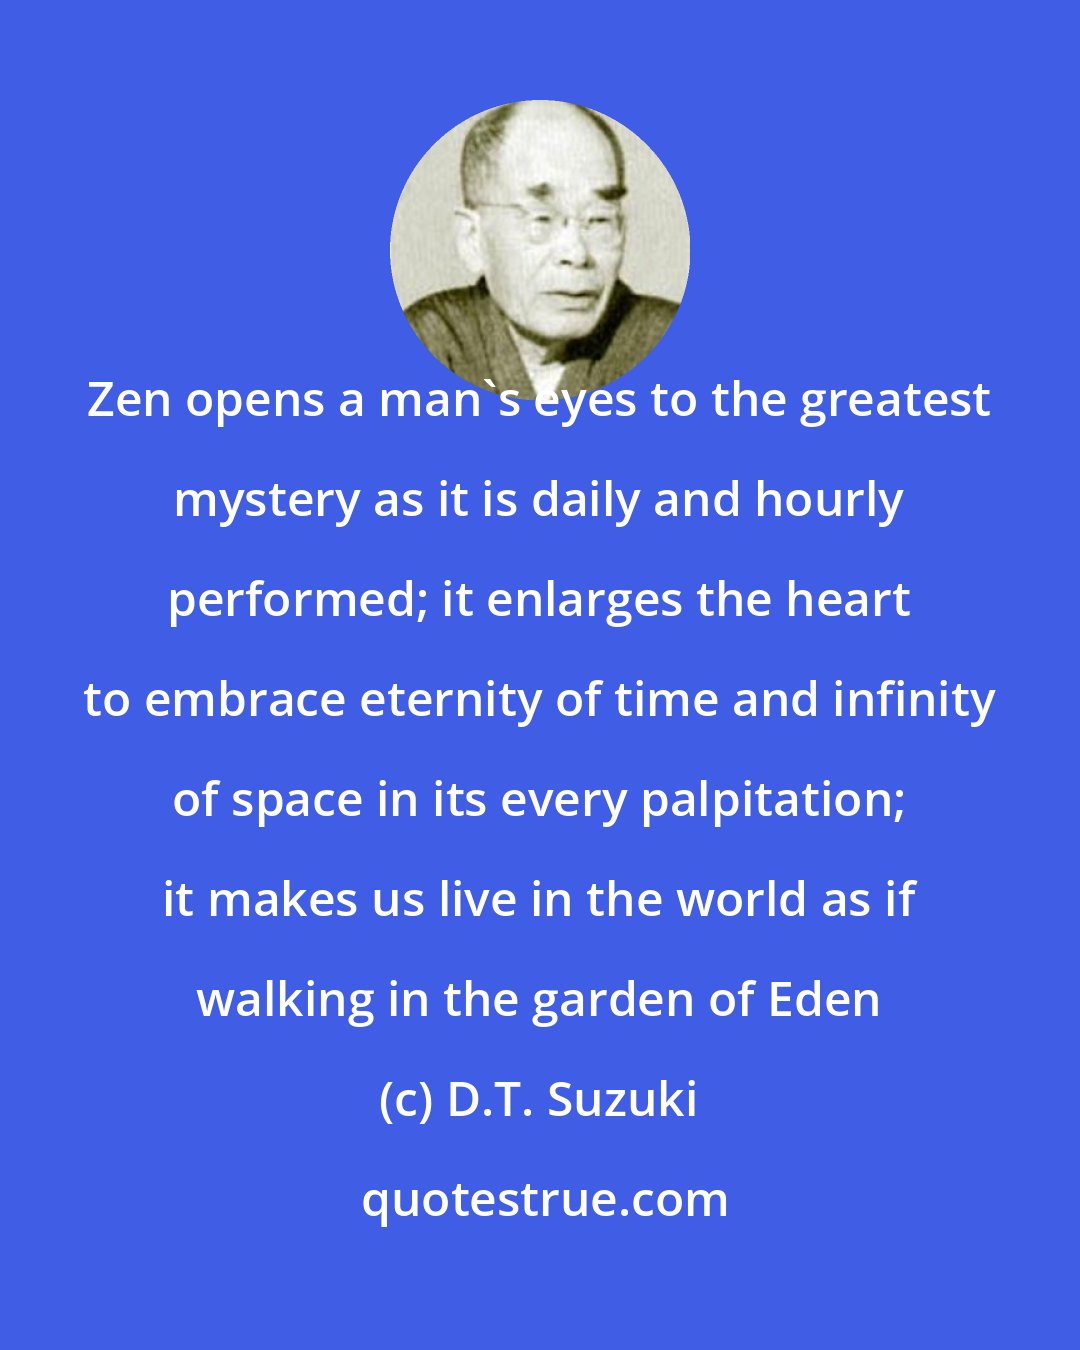 D.T. Suzuki: Zen opens a man's eyes to the greatest mystery as it is daily and hourly performed; it enlarges the heart to embrace eternity of time and infinity of space in its every palpitation; it makes us live in the world as if walking in the garden of Eden